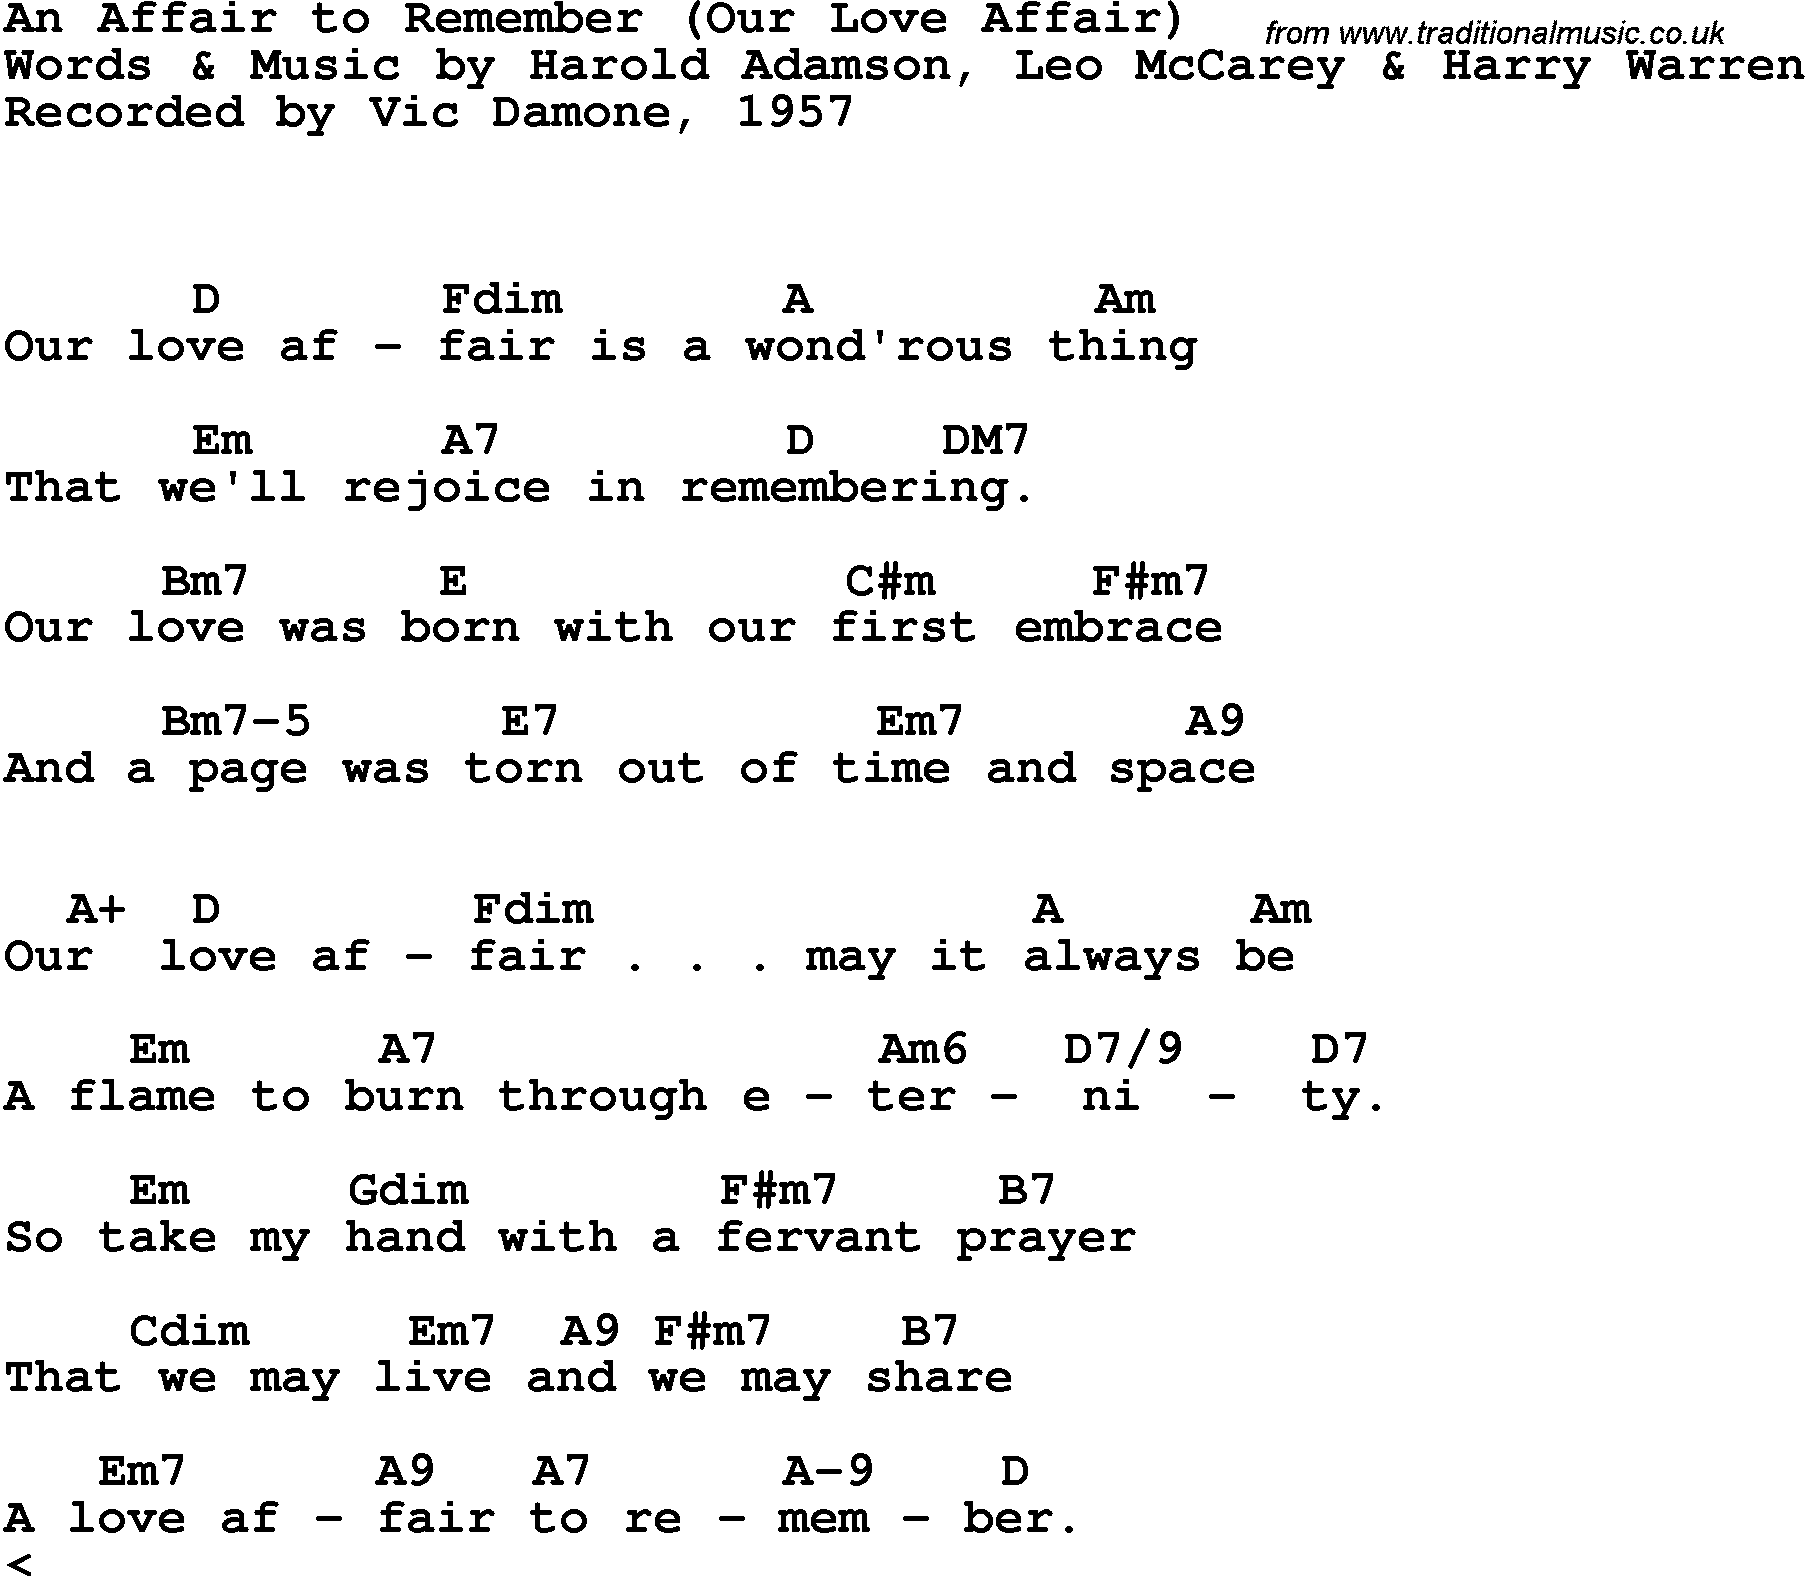 Song Lyrics with guitar chords for An Affair To Remember (Our Love Affair) - Vic Damone, 1957